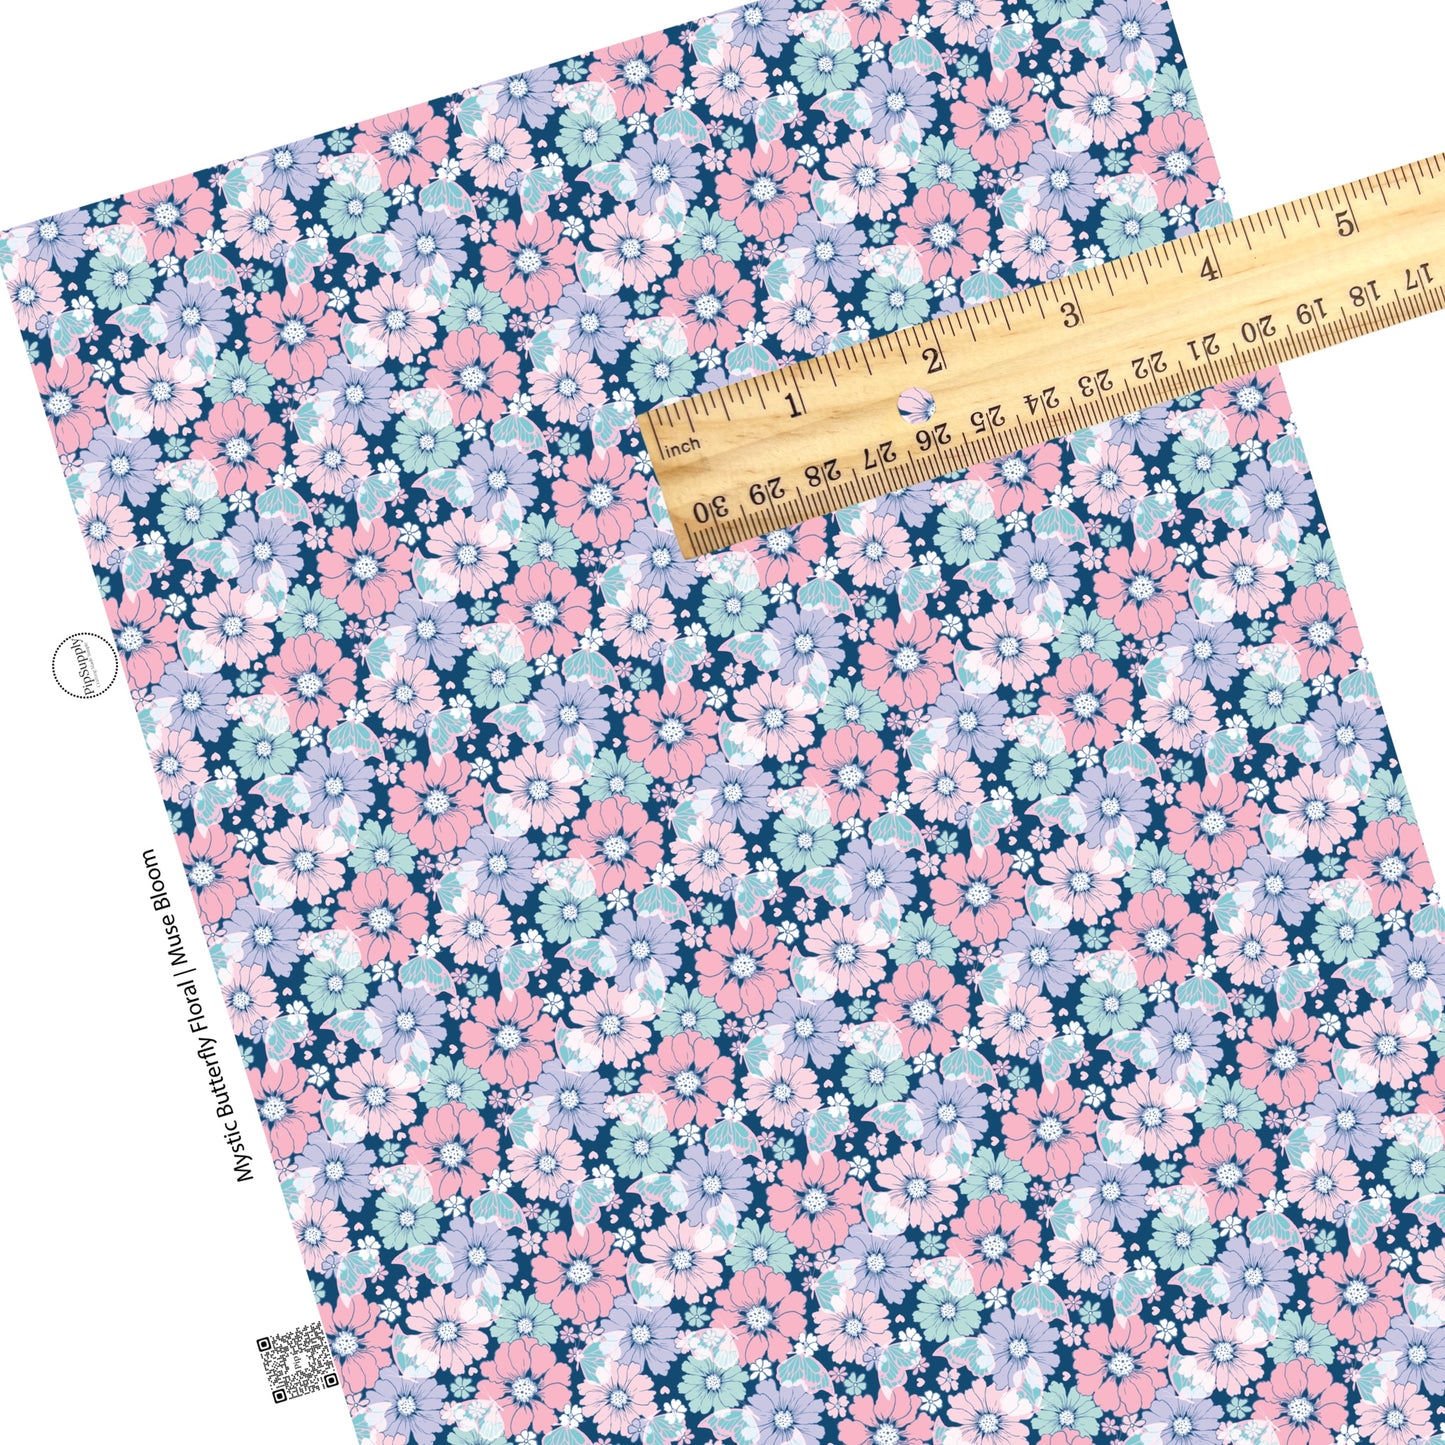 Light colored flowers in pink, aqua, purple, and white with aqua butterflies on dark navy blue faux leather sheet.